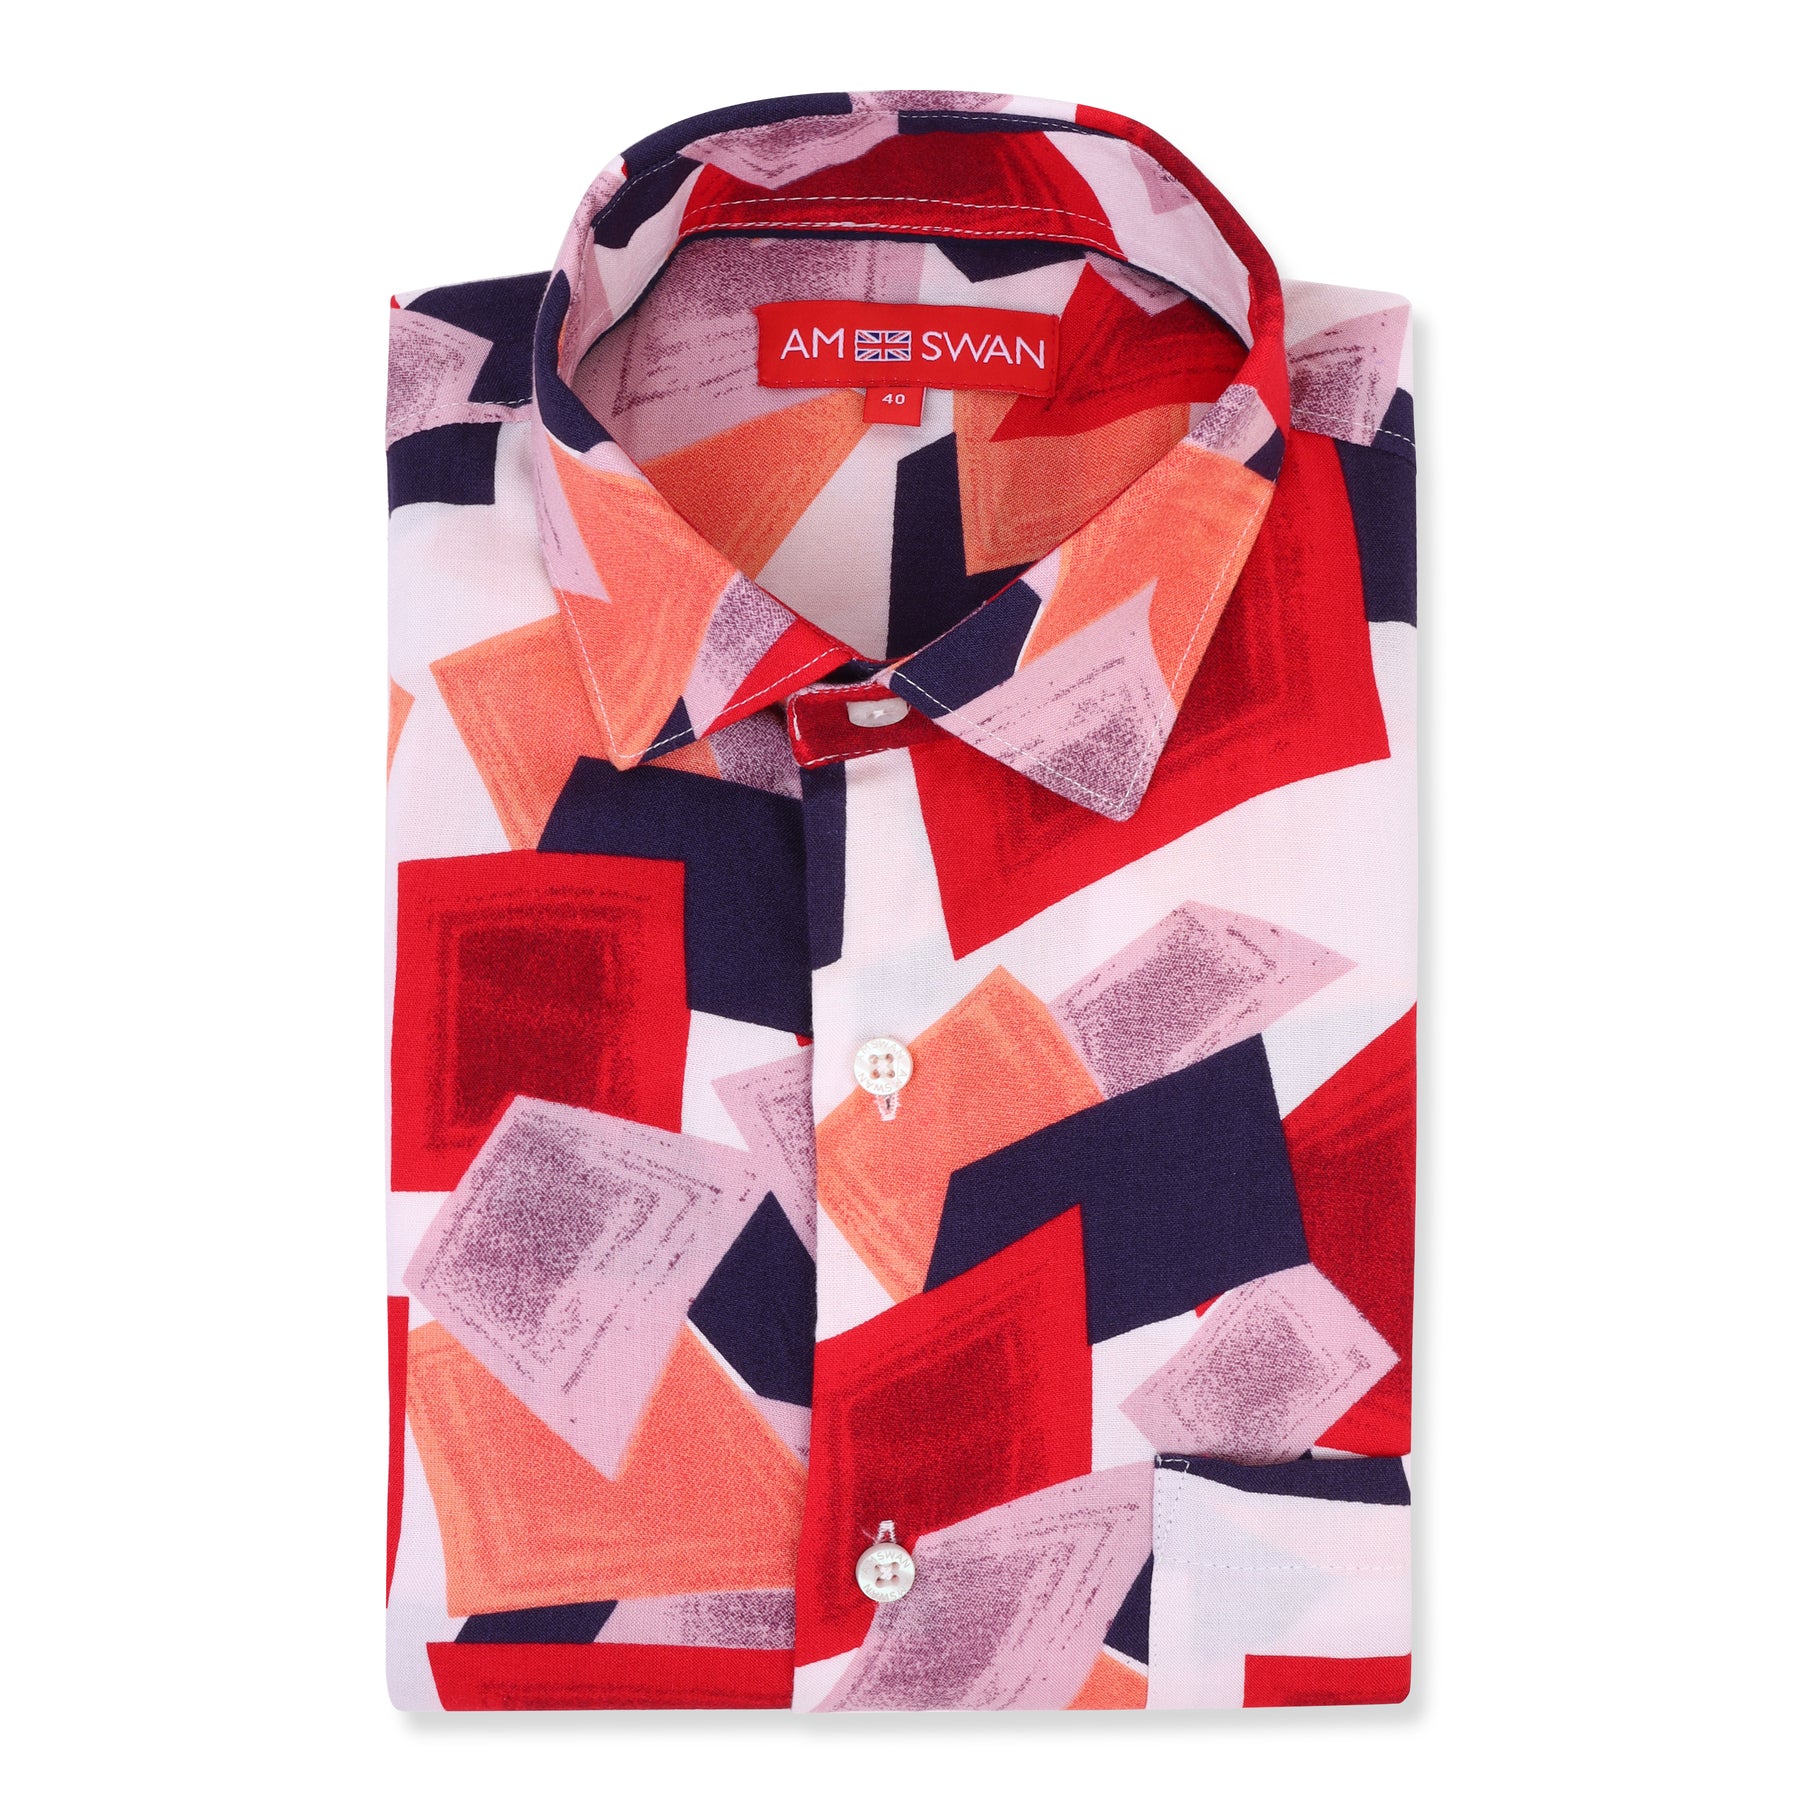 Men's Premium Rayon Shirt With Red And Blue Print